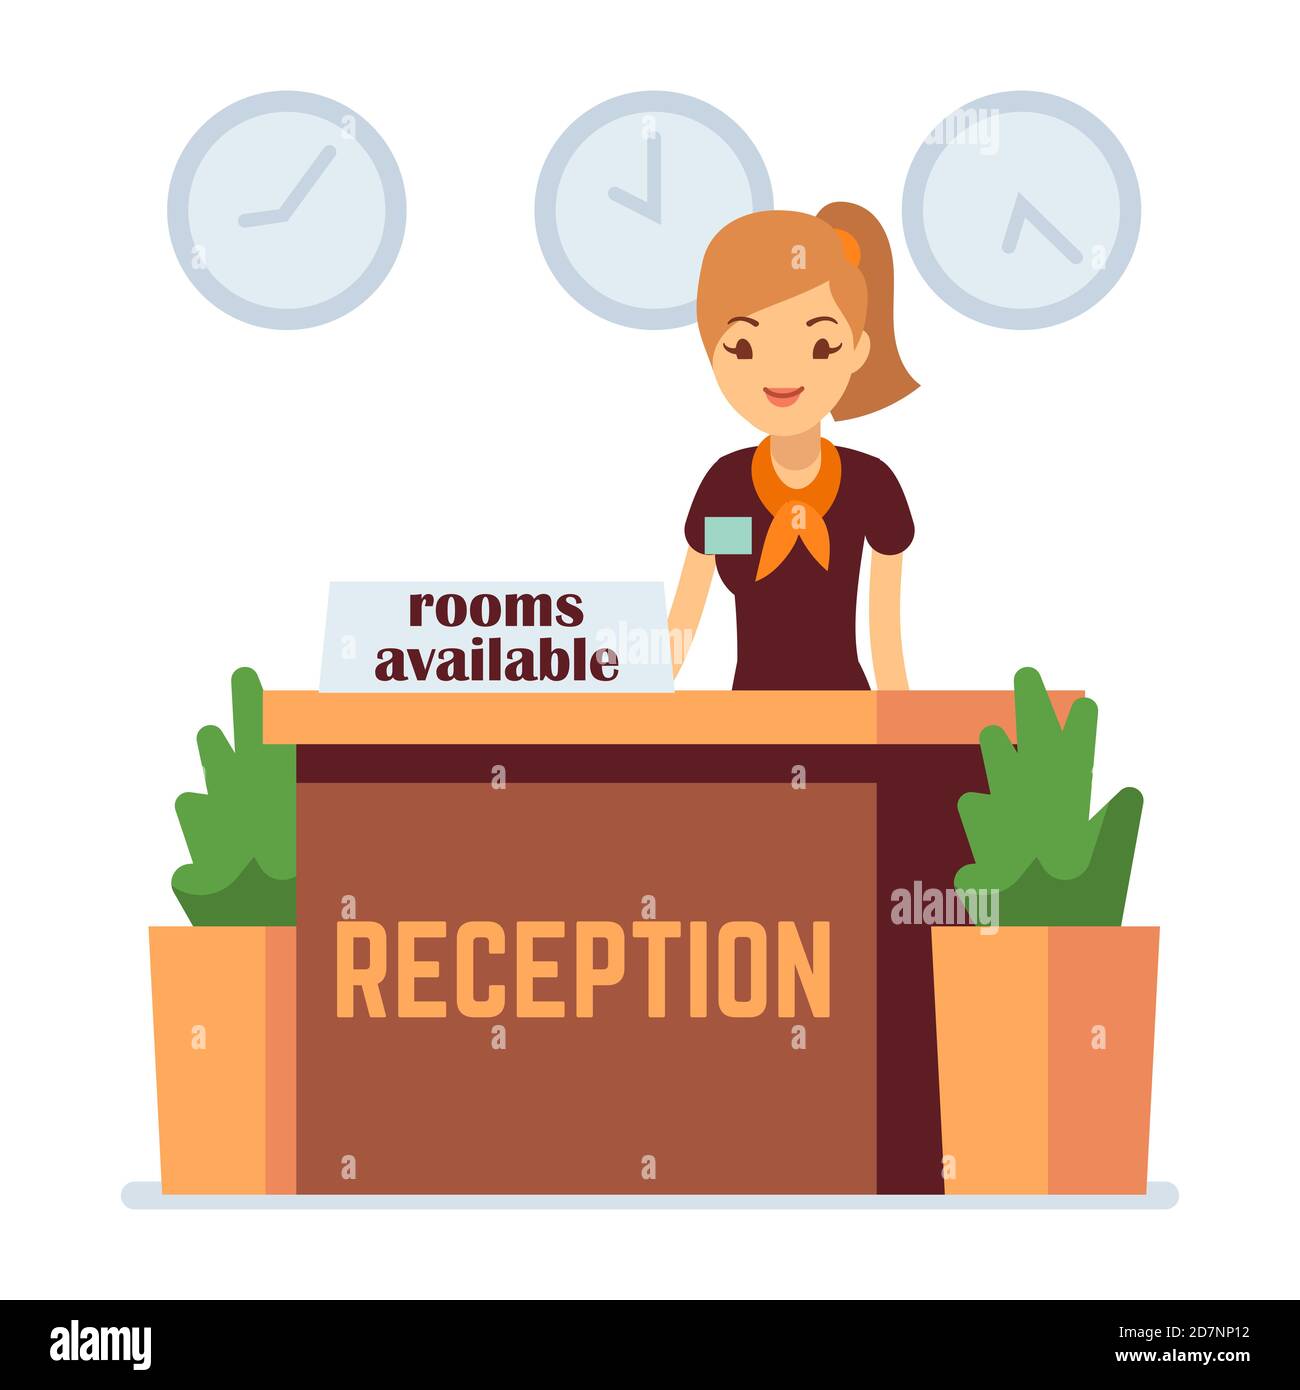 Hotel or hostel reception with cartoon girl. Rooms available vector concept. Hotel receptionist, reception desk service illustration Stock Vector